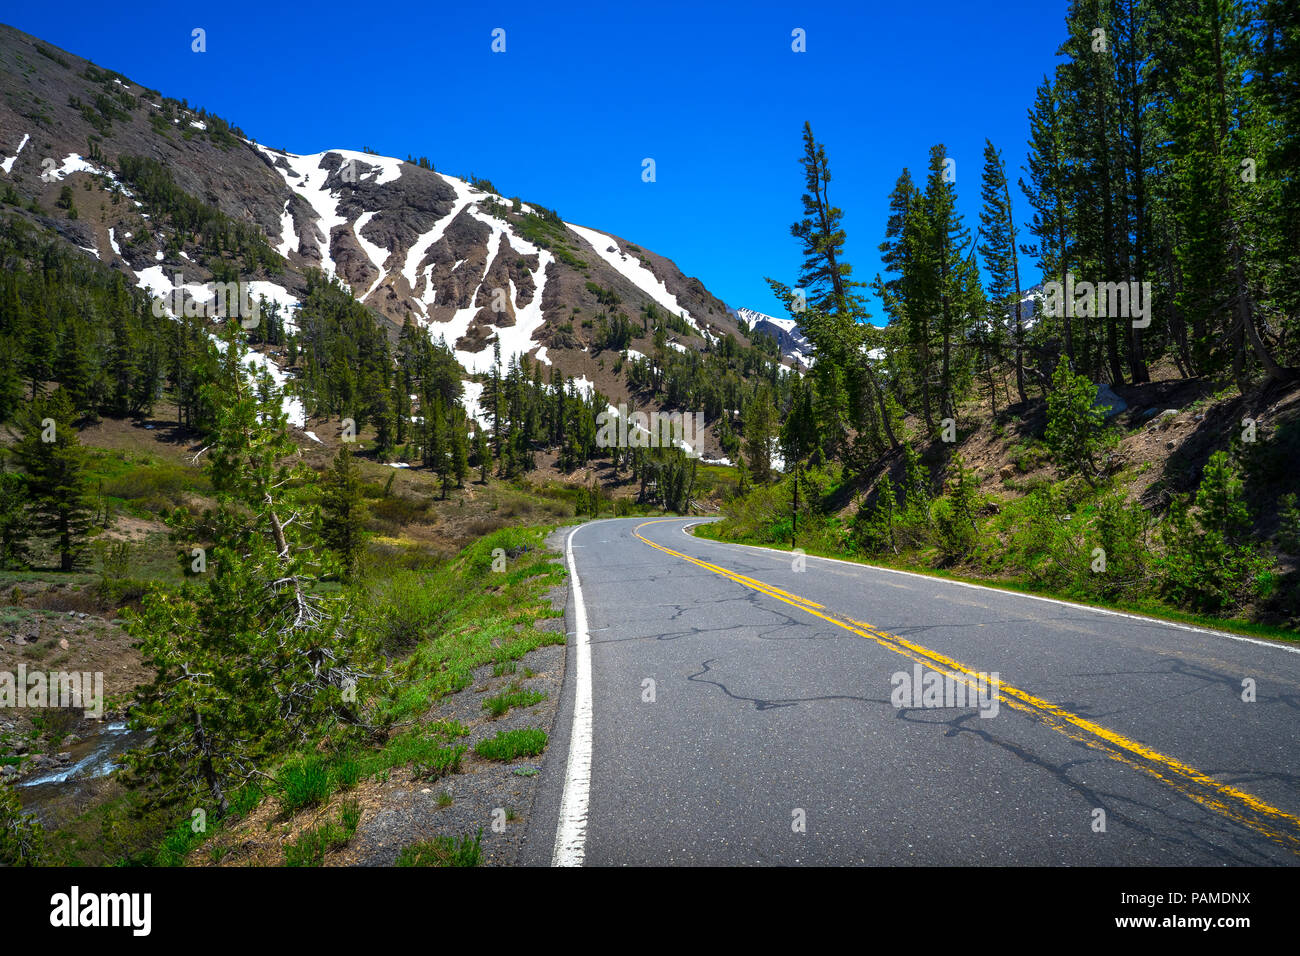 Pavement and double yellow line leading through snowy peaks in Spring - Highway 108 Roadside, California Stock Photo